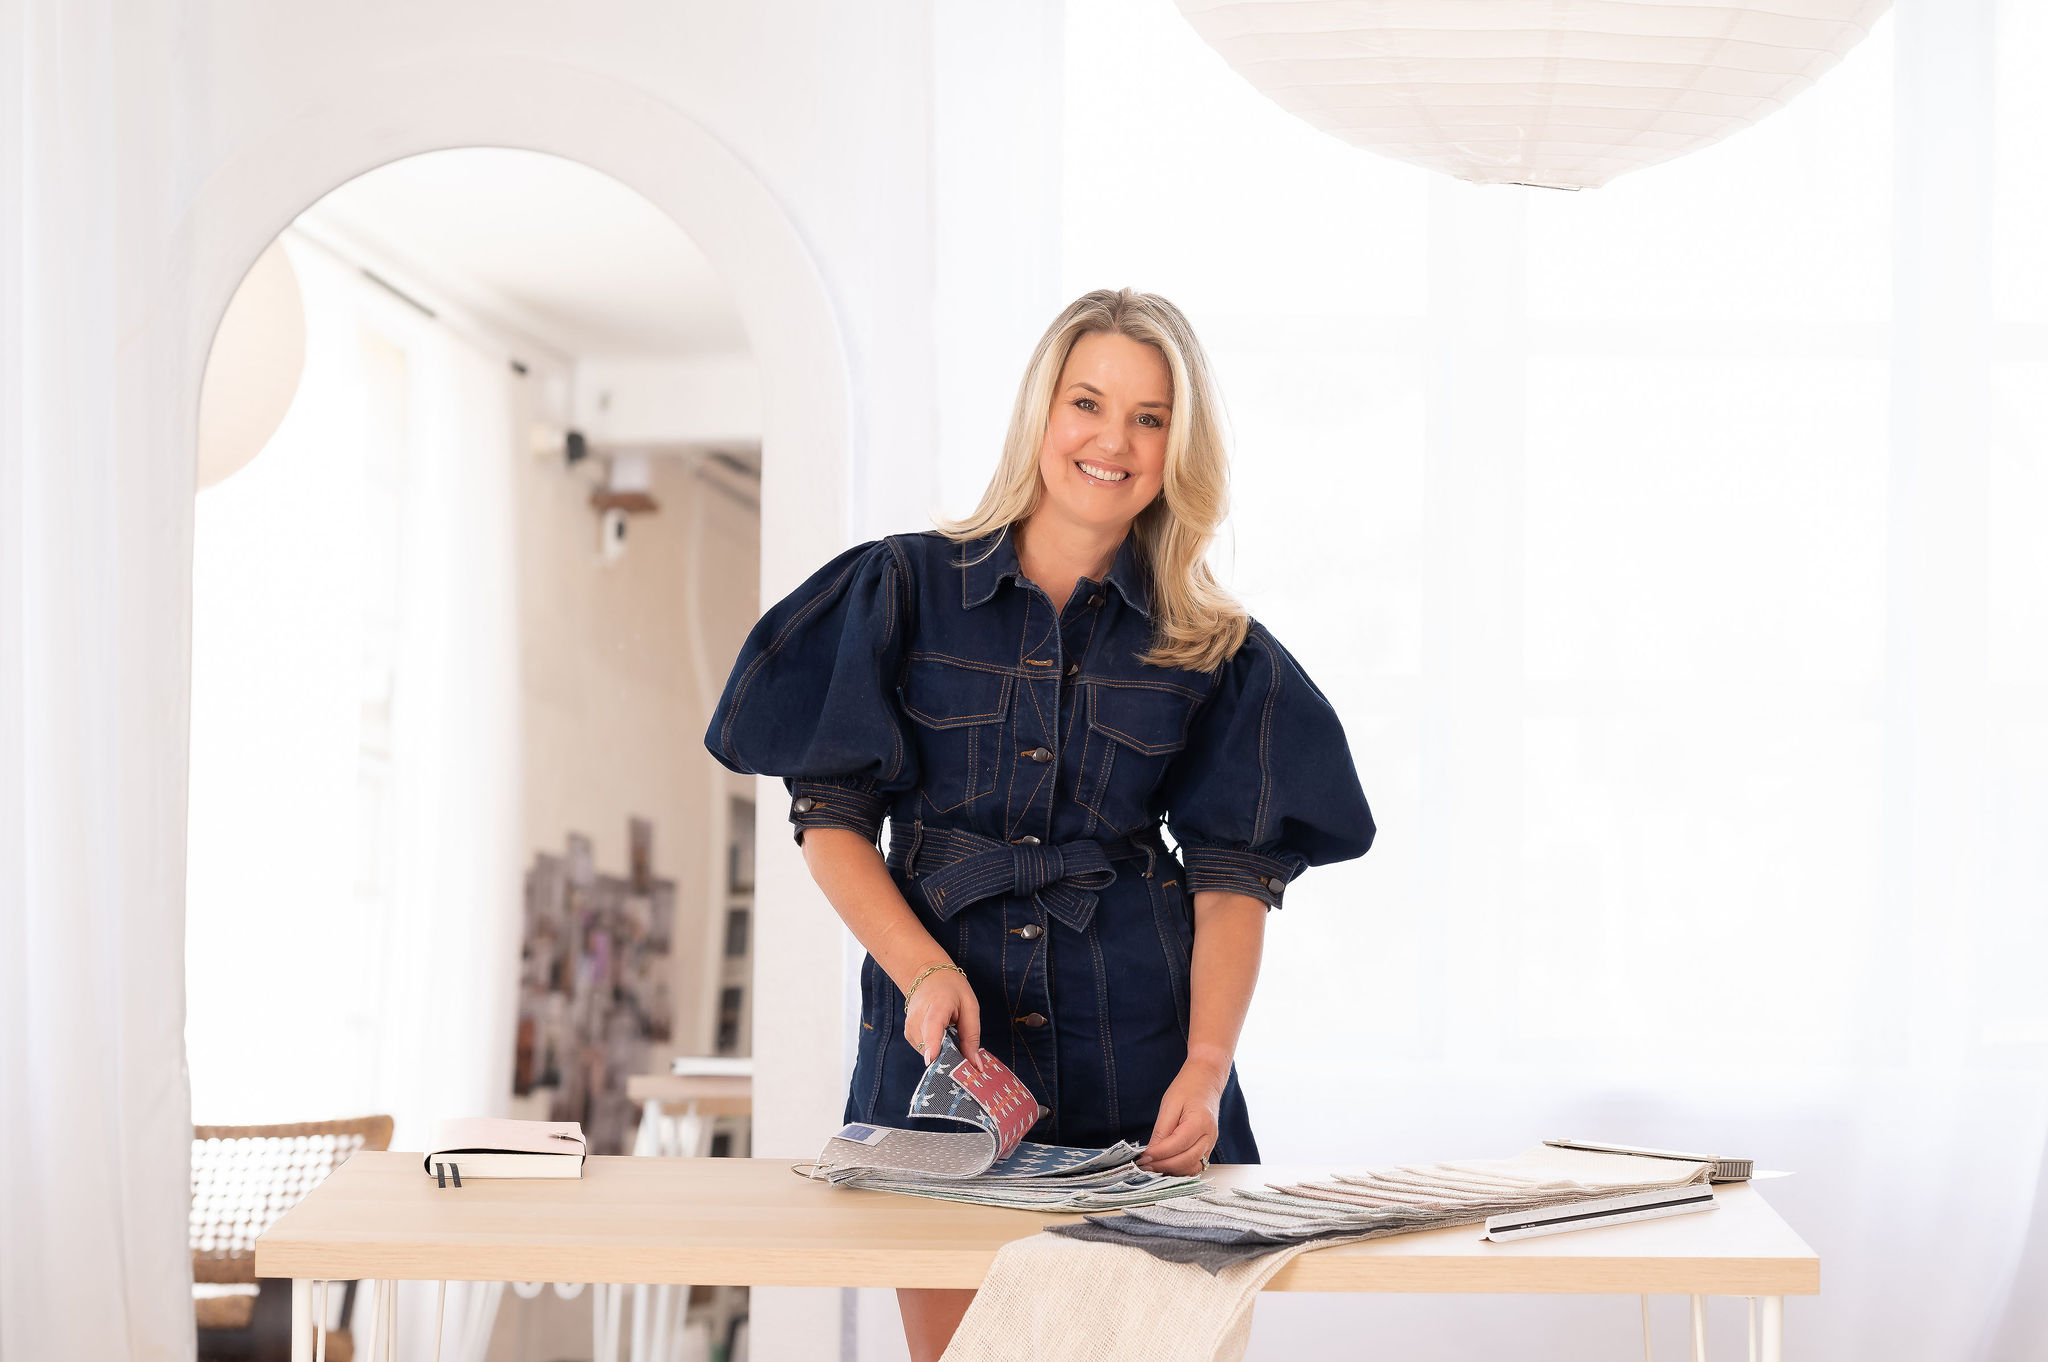 Principal designer at Bella Vie Interiors, Lisa Alward, stands at a work table with fabric samples, embodying professional interior design expertise.